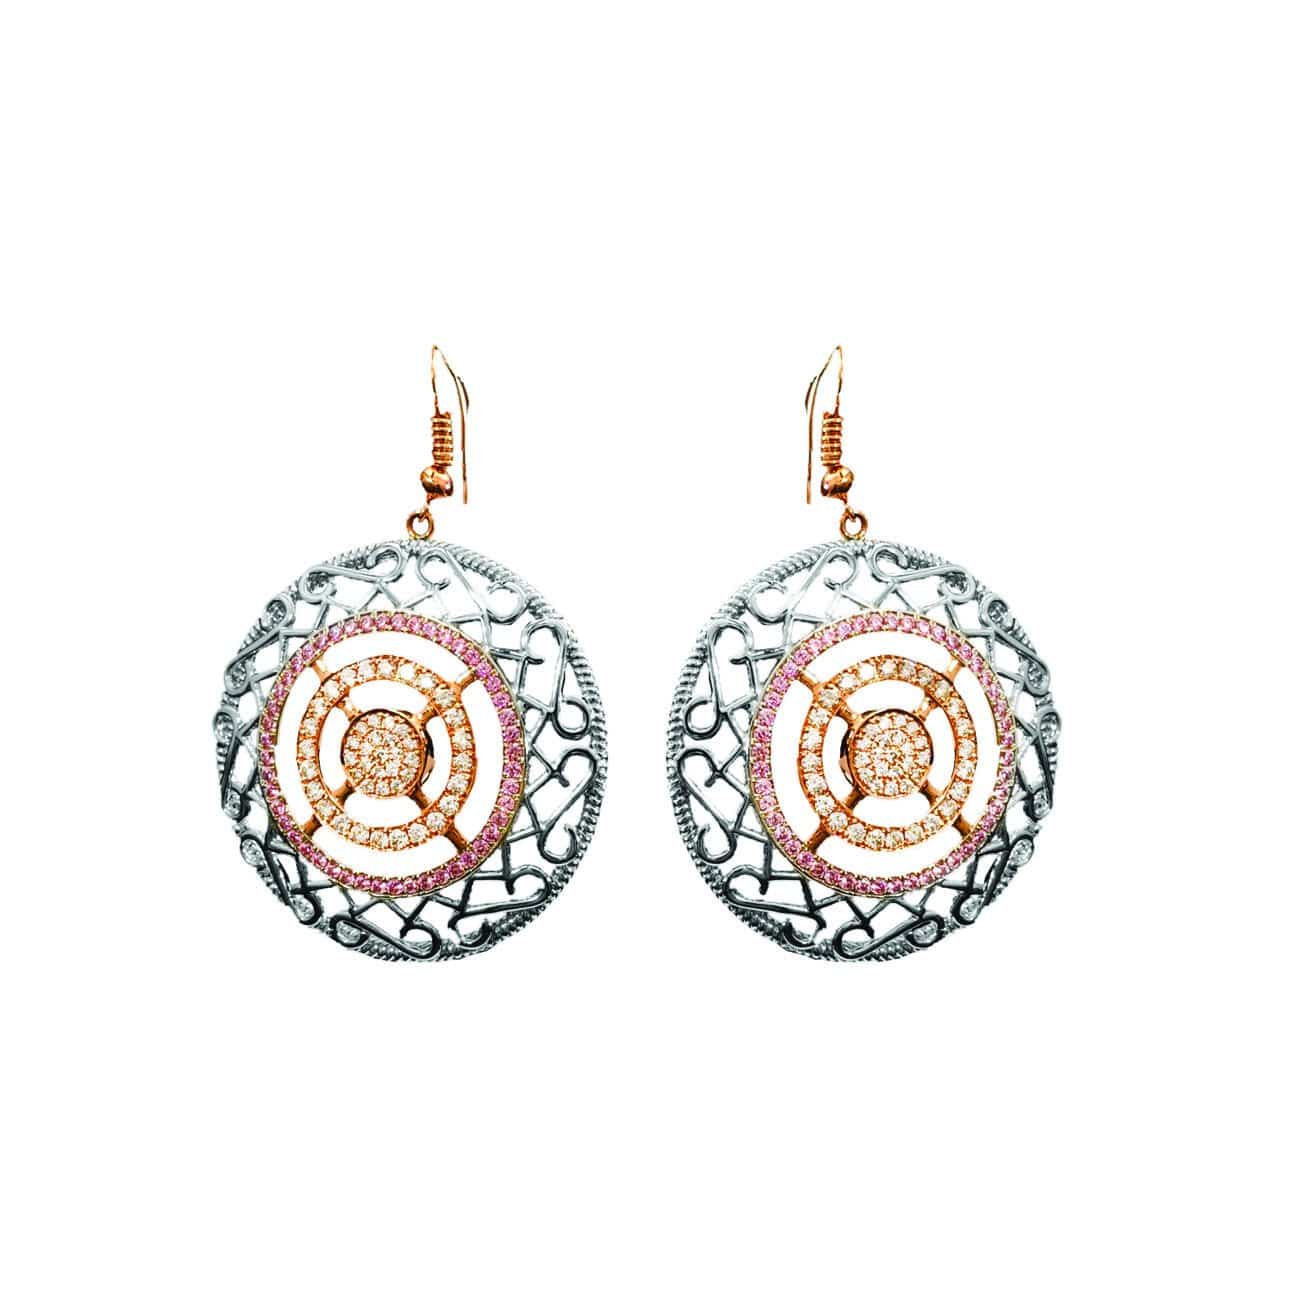 BASKET EARRINGS - Chris Aire Fine Jewelry & Timepieces